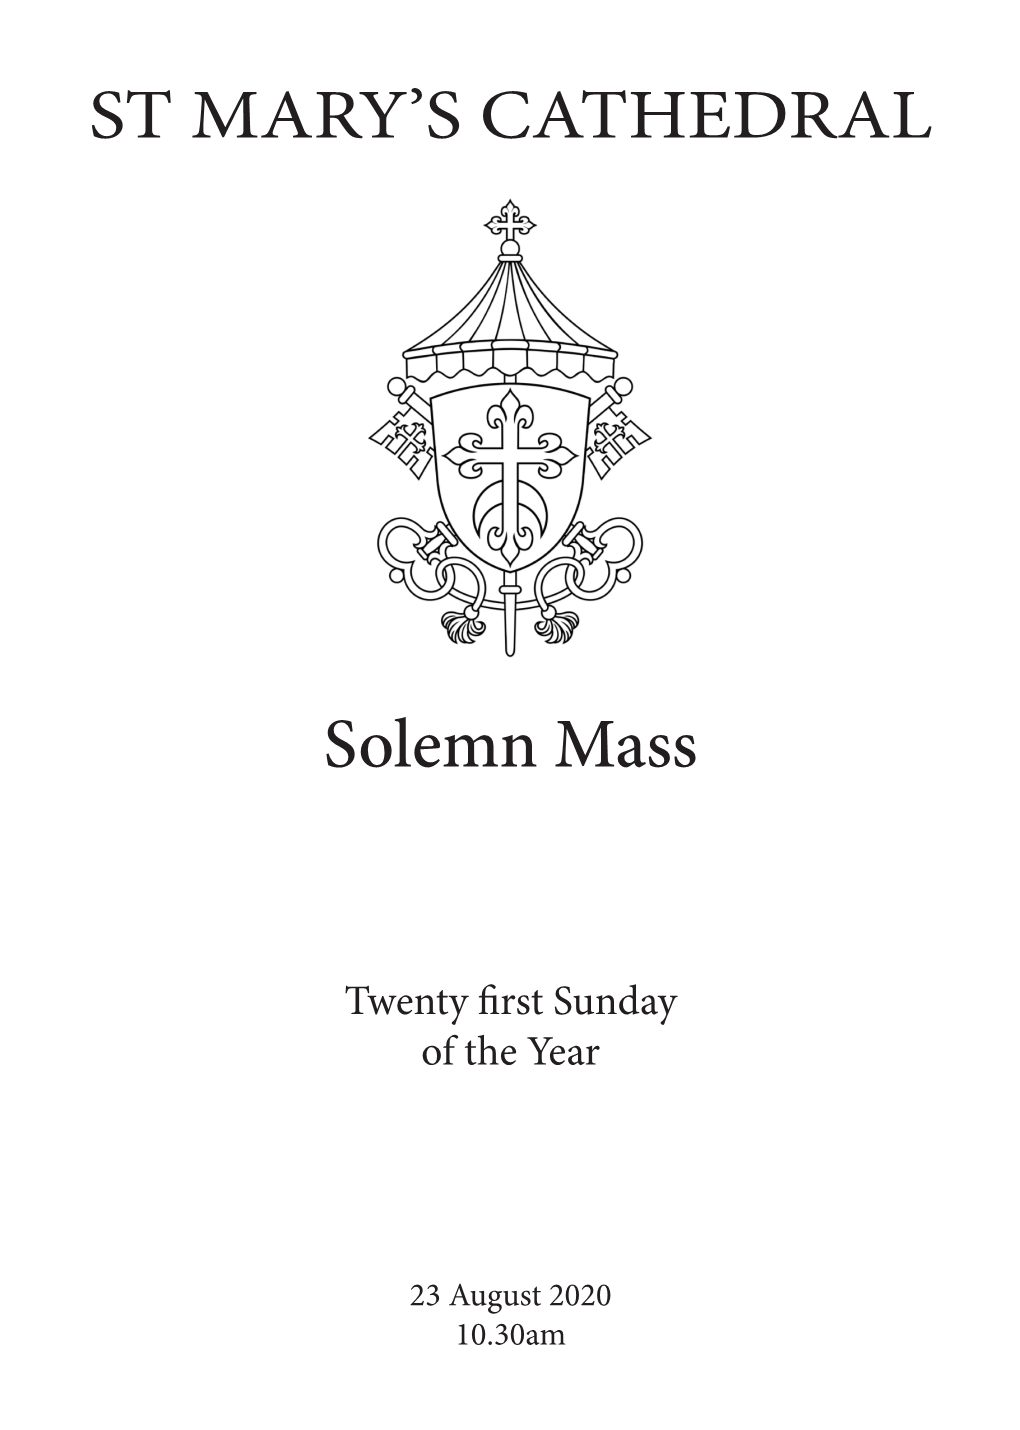 ST MARY's CATHEDRAL Solemn Mass